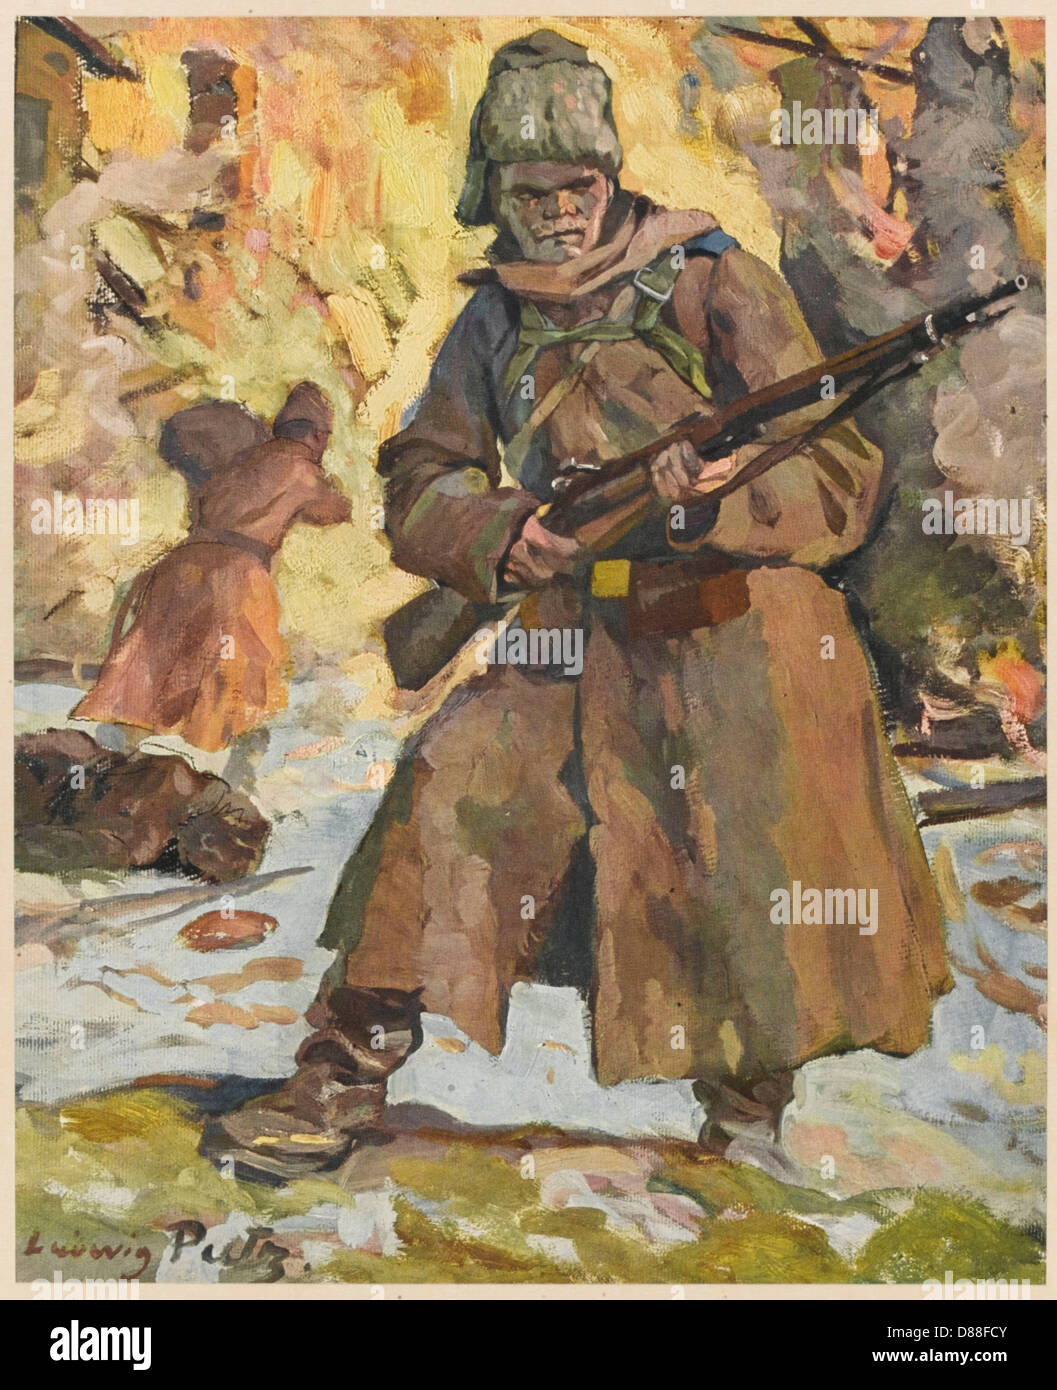 WW1 RUSSIAN SOLDIER Stock Photo